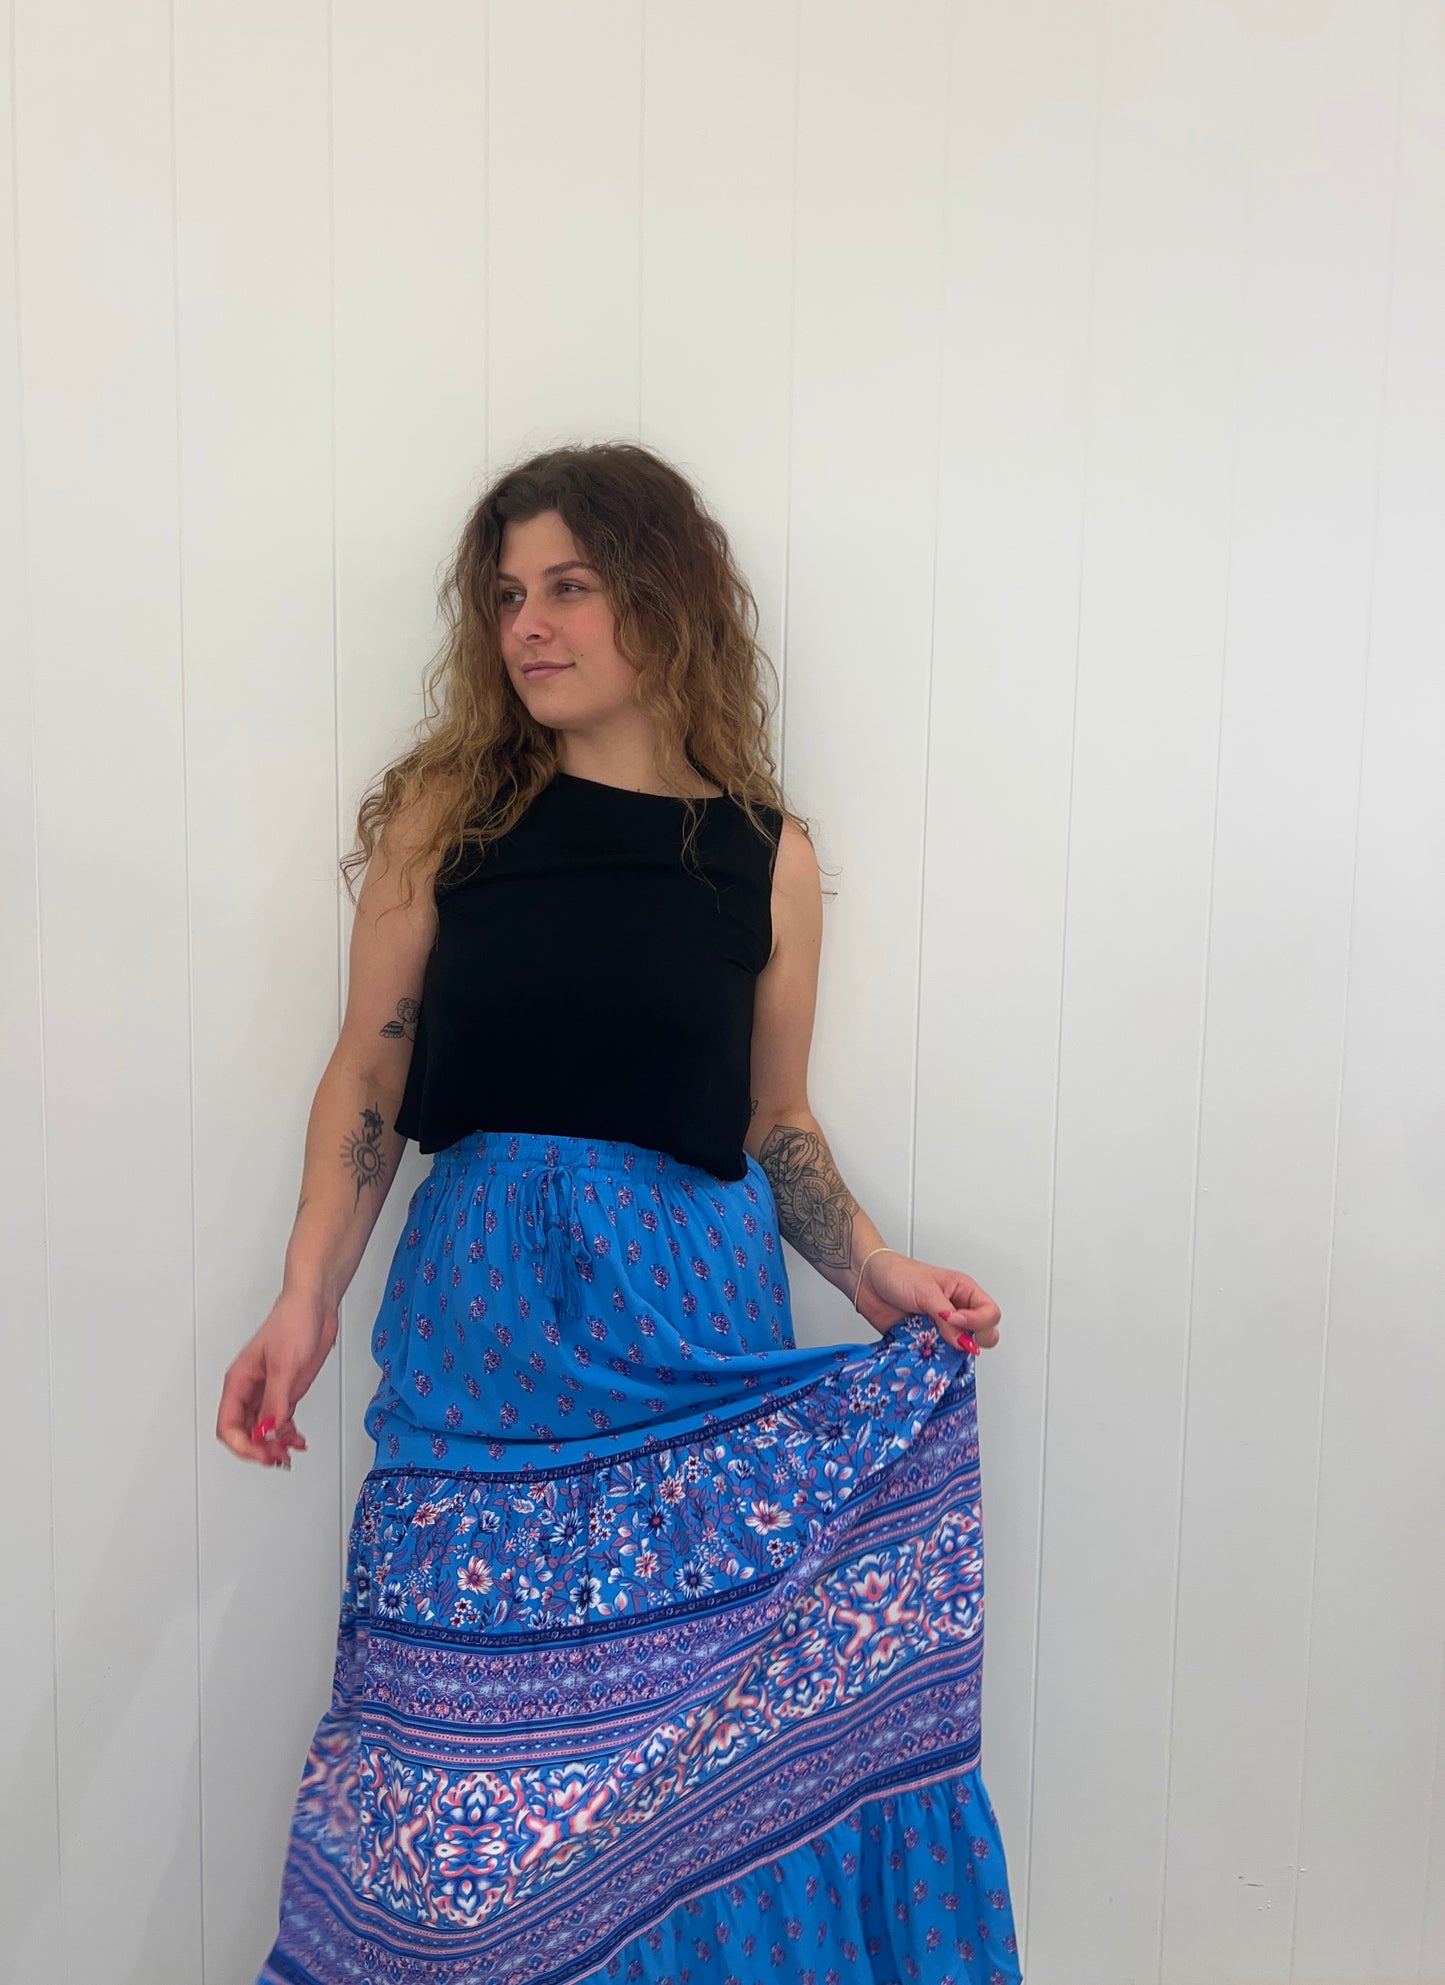 Step out in style in the Abigail Maxi Skirt. With elegant, tassel detailing, and a luxurious floral print, this stunning skirt features an elasticated waist and drawstring for a perfect fit, so you can feel comfortable yet oh-so-stylish.